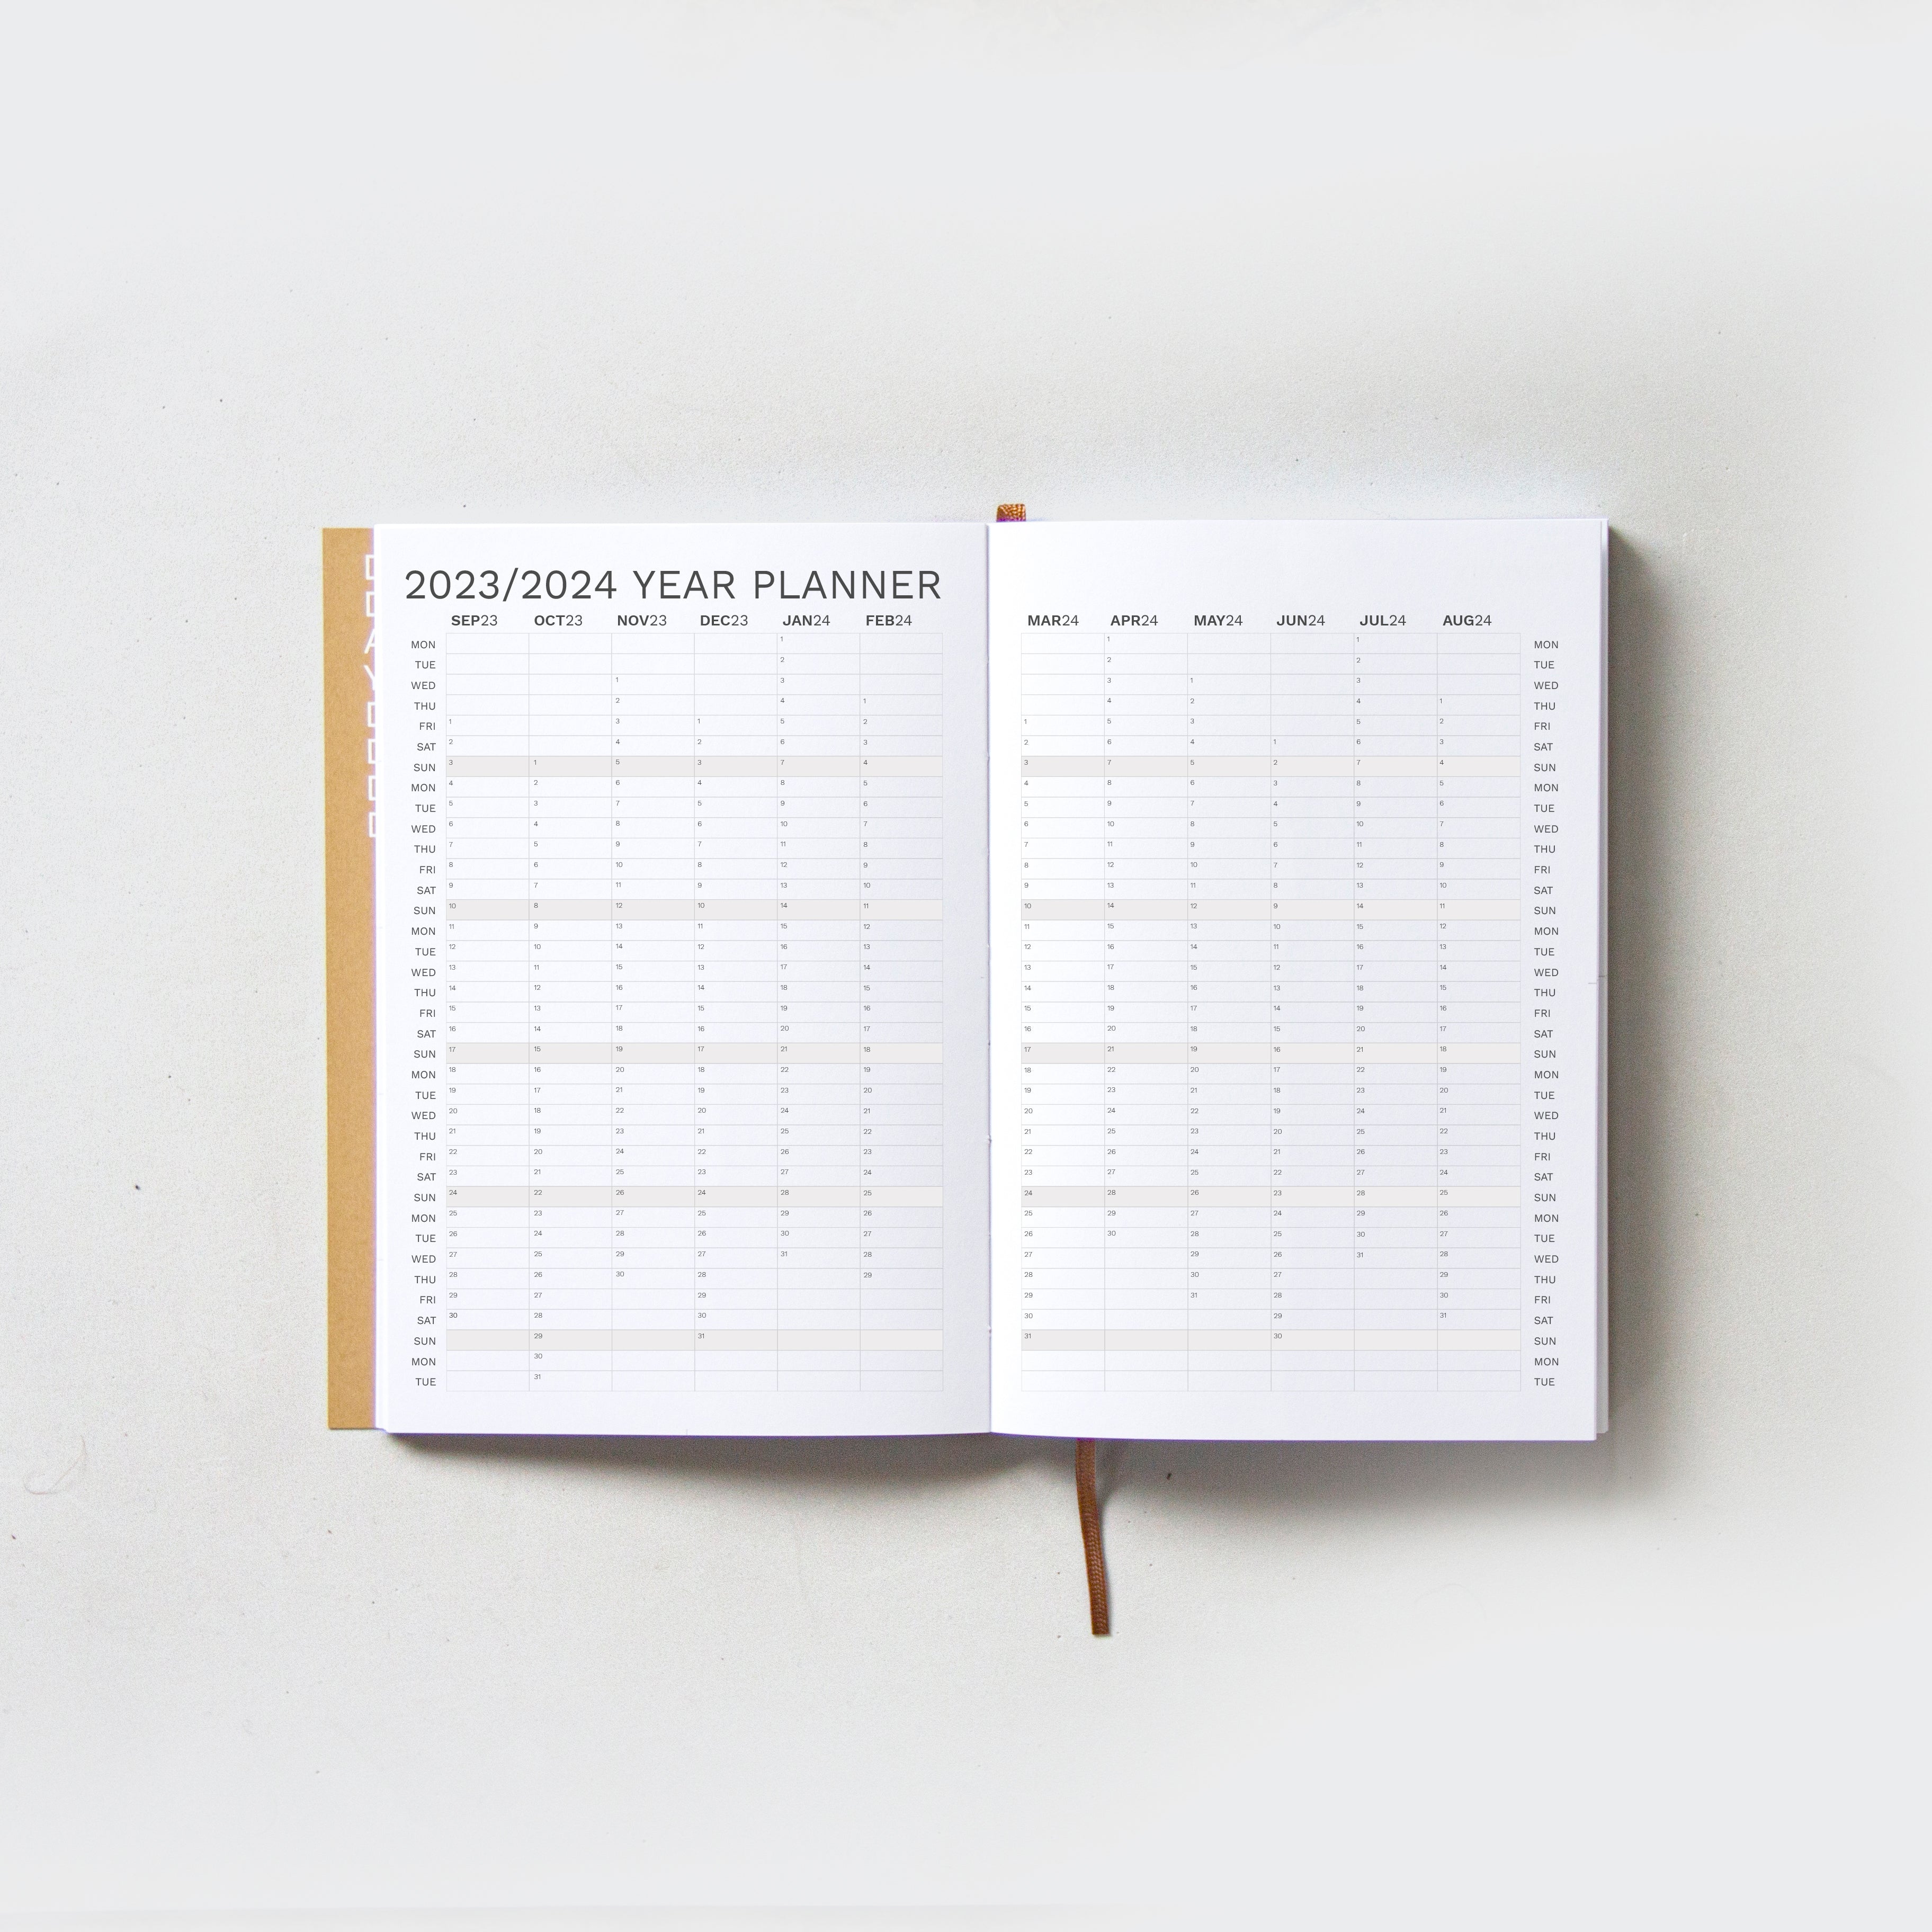 OCTÀGON DESIGN, Open &quot;Sep23 to Aug24&quot; Academic weekly planner. Sep23 to Aug24 year planner.